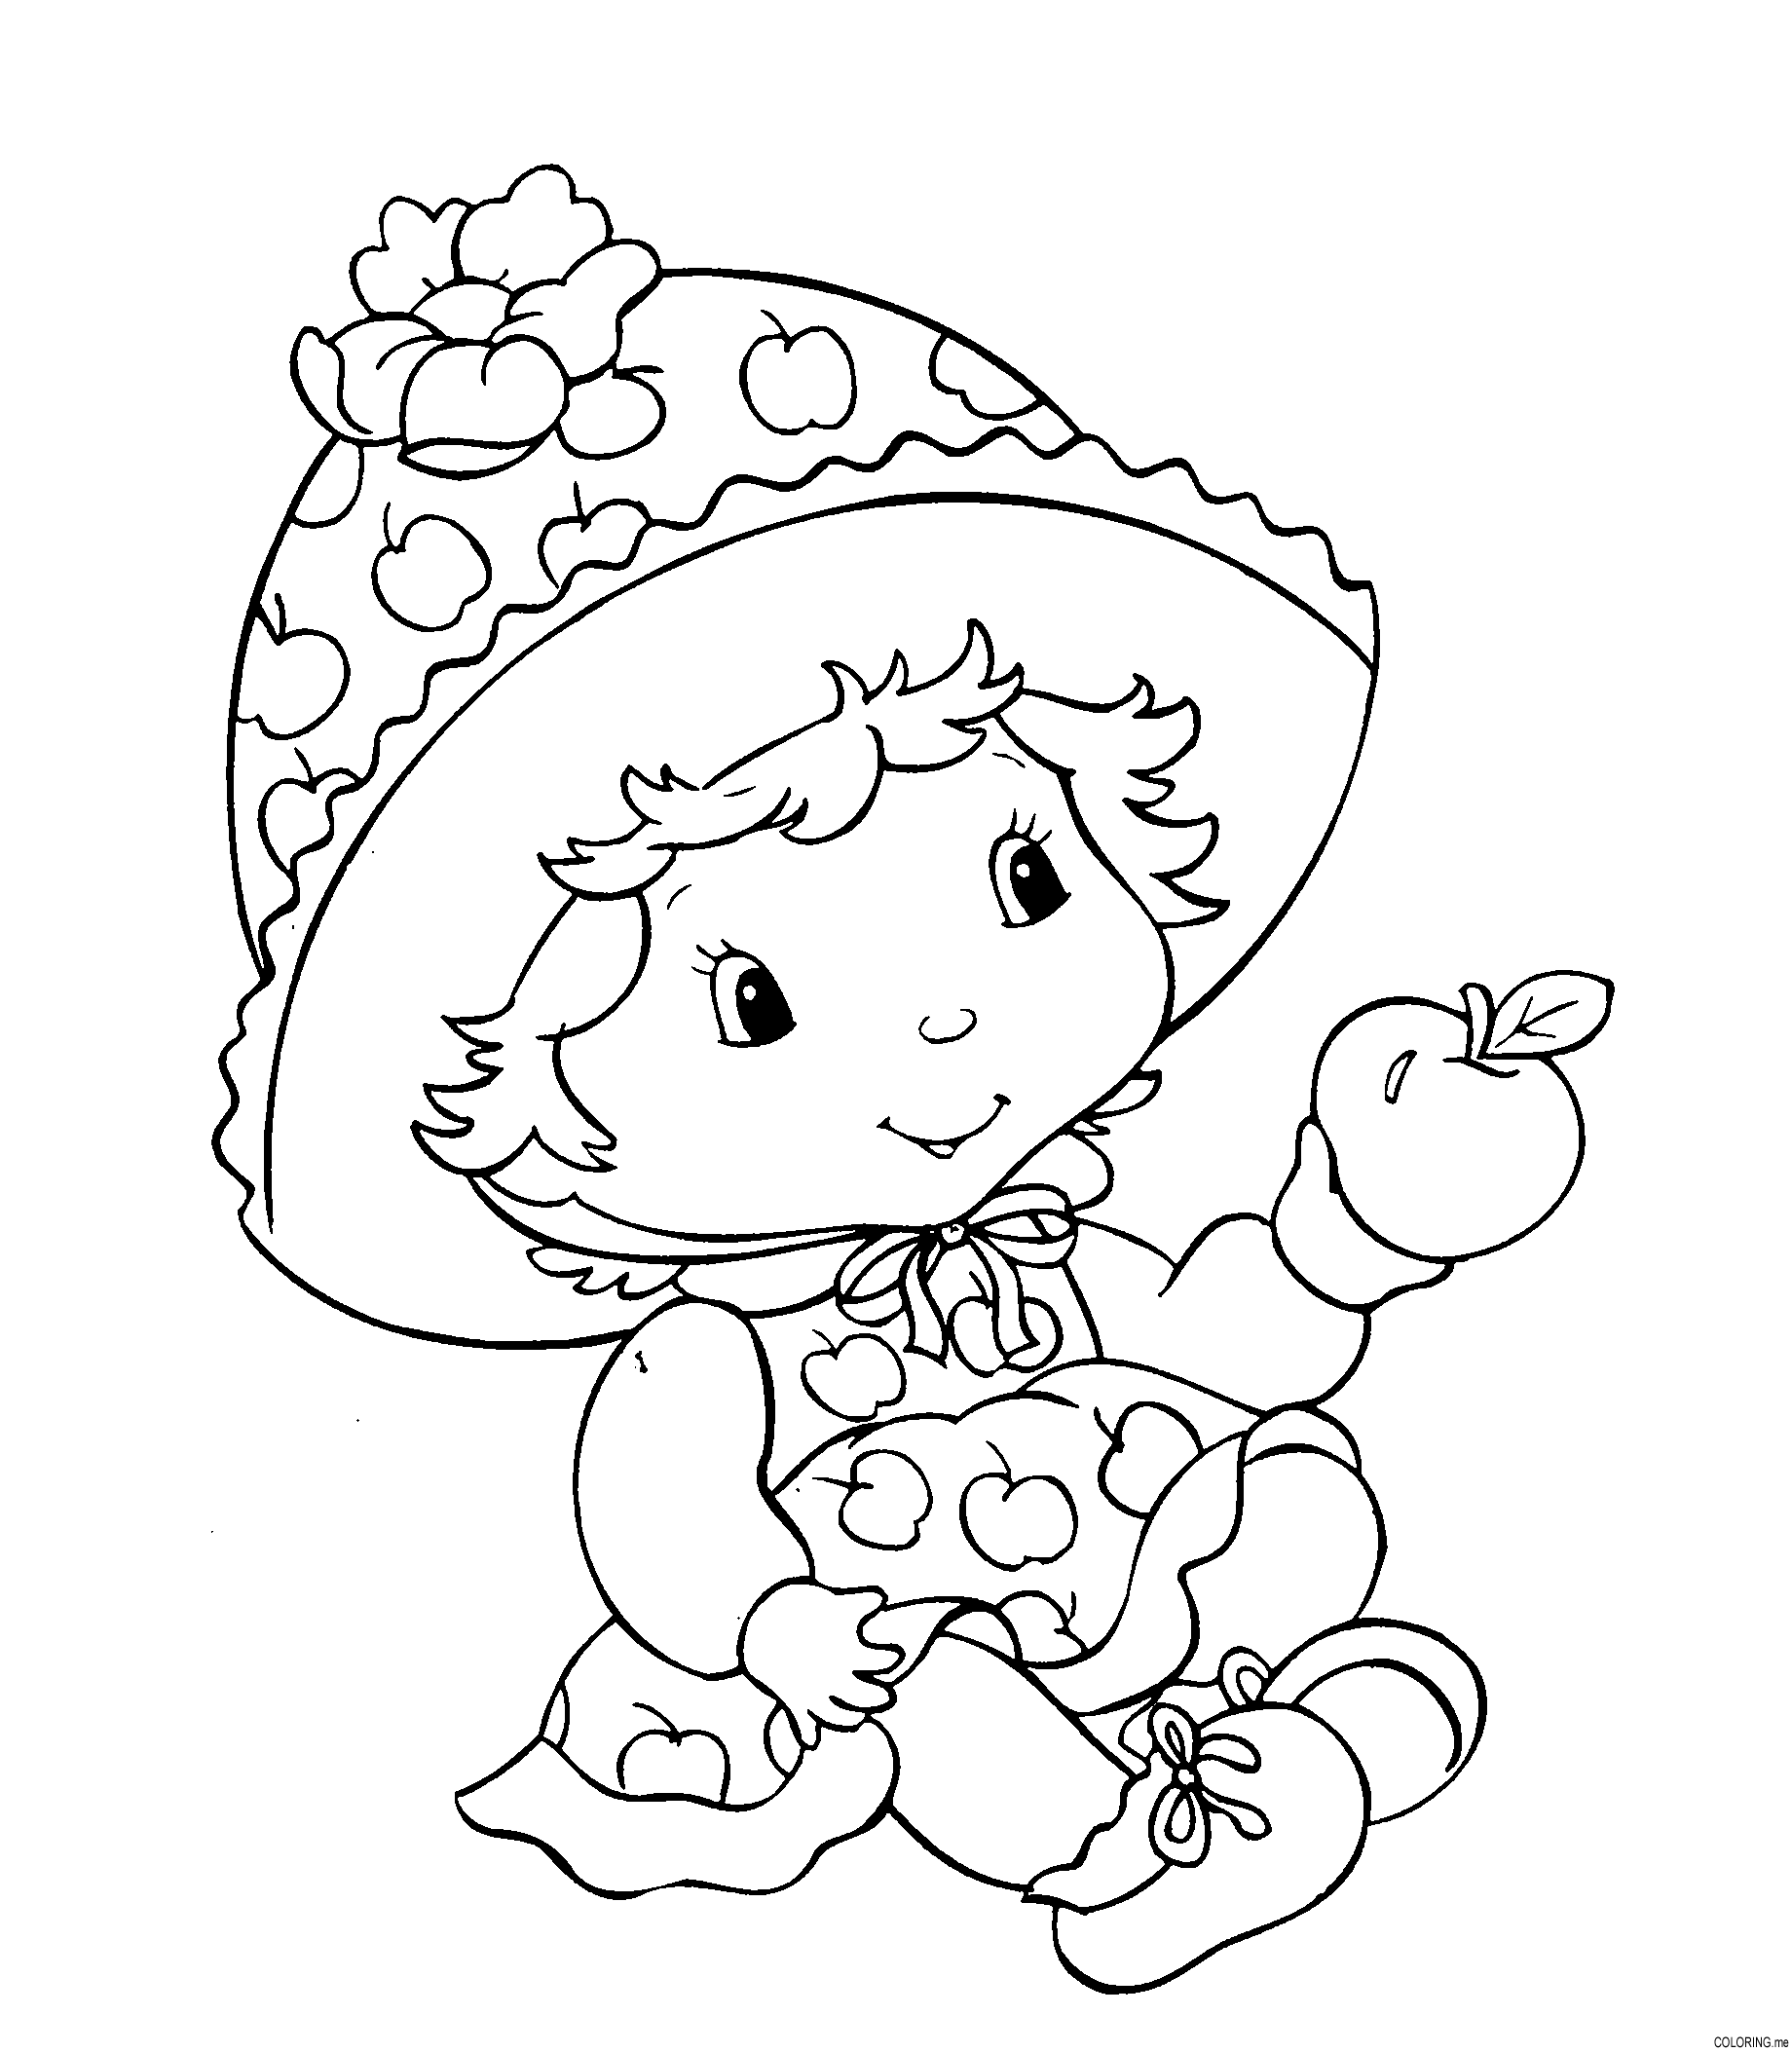 new strawberry shortcake coloring pages printable free printable strawberry shortcake coloring pages for kids printable new strawberry shortcake pages coloring 